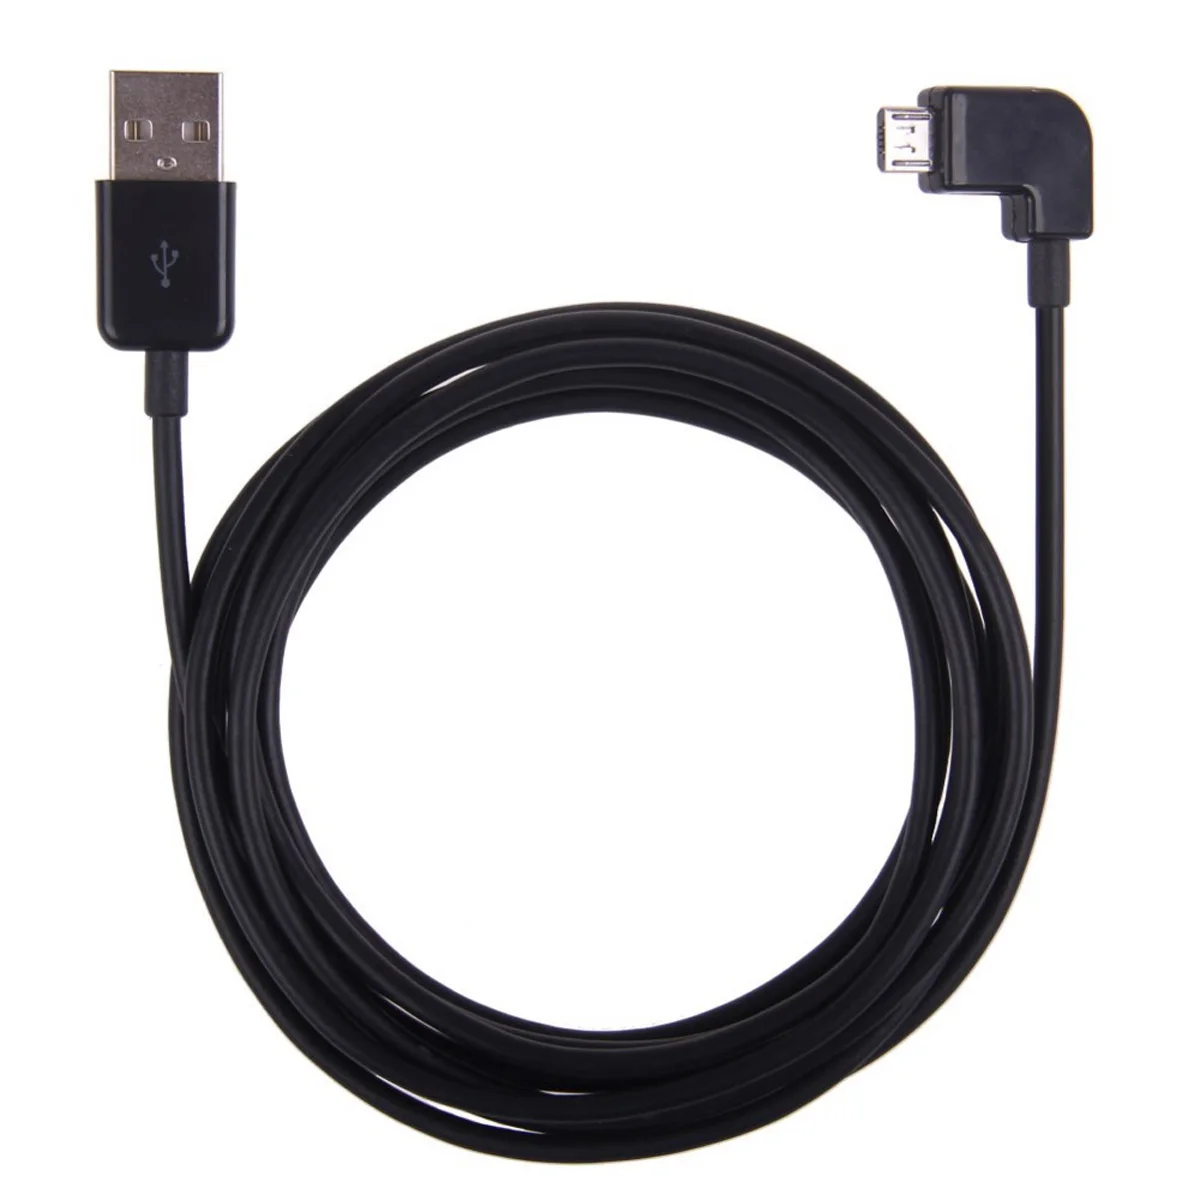 

Cablecc CY Left angled 90 Degree Micro USB Male to USB Data Charge Cable for Mobile Phone & Tablet 200cm Black Color